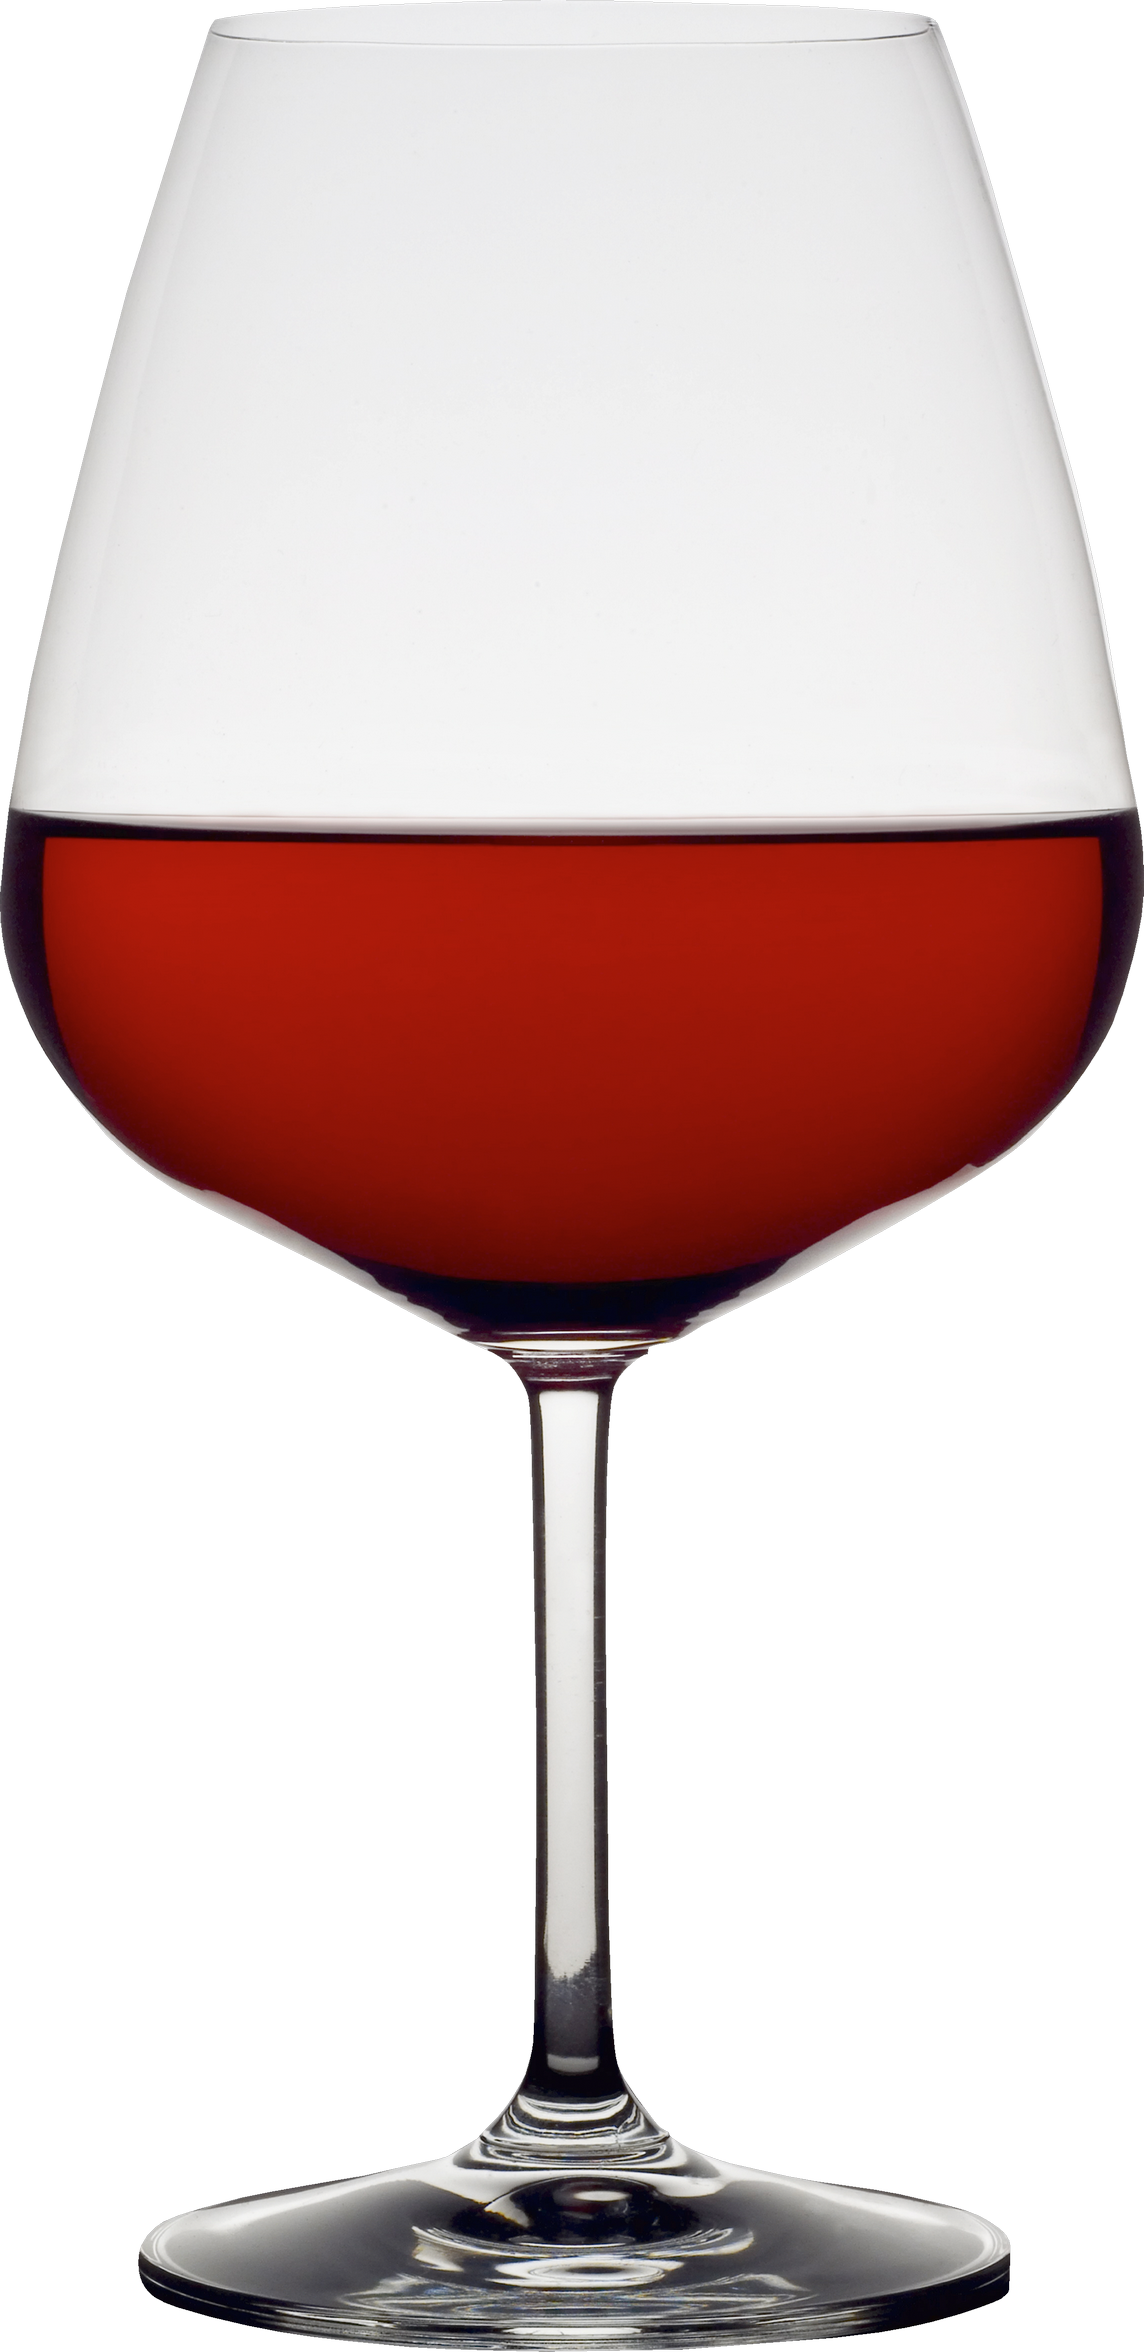 Wine Glass PNG Image - PurePNG | Free transparent CC0 PNG Image Library